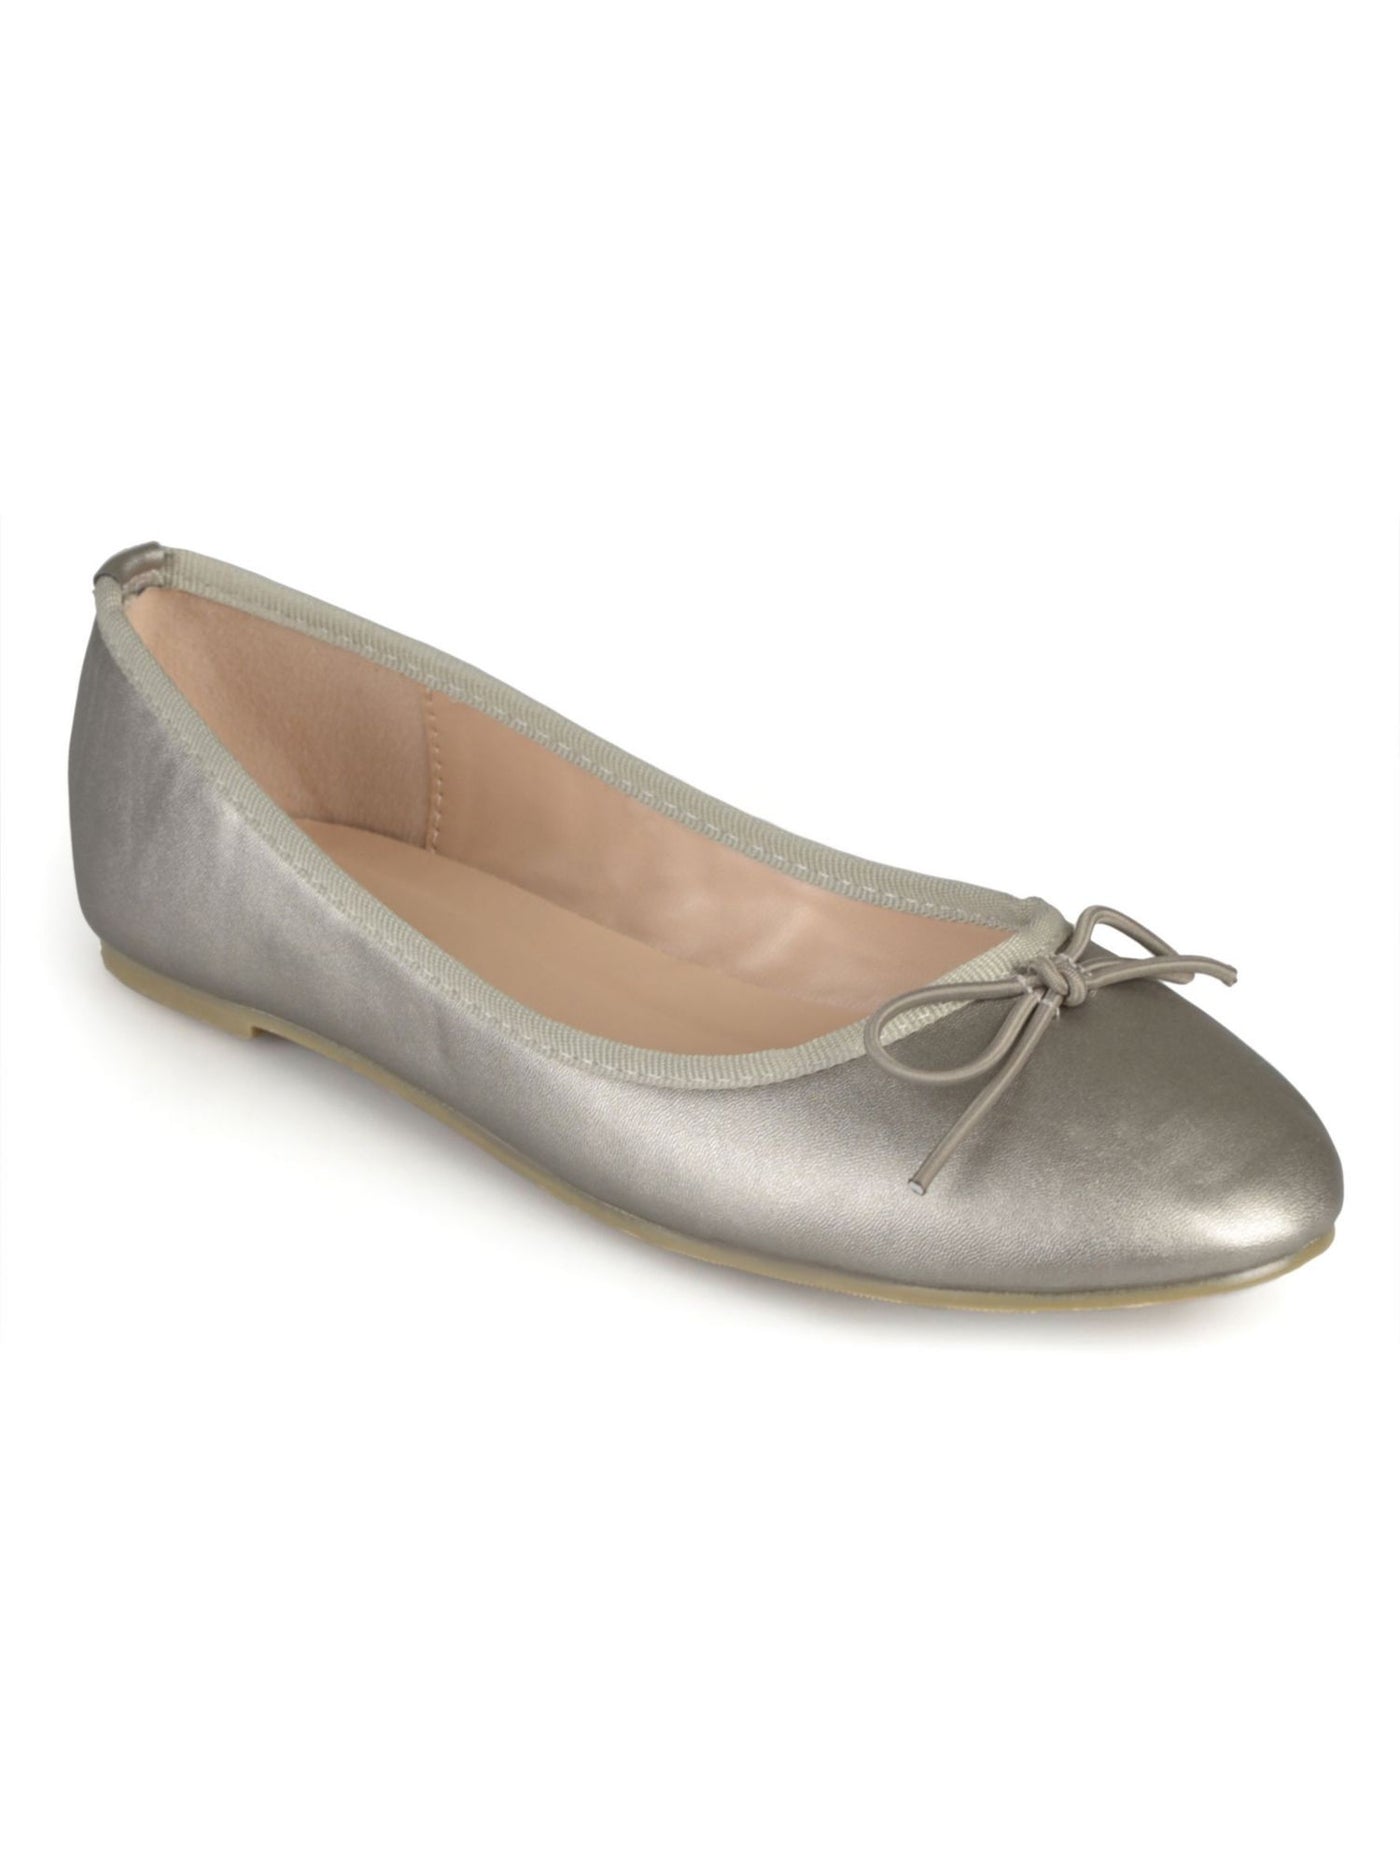 JOURNEE COLLECTION Womens Gray Bow Accent Padded Vika Round Toe Slip On Ballet Flats 11 M